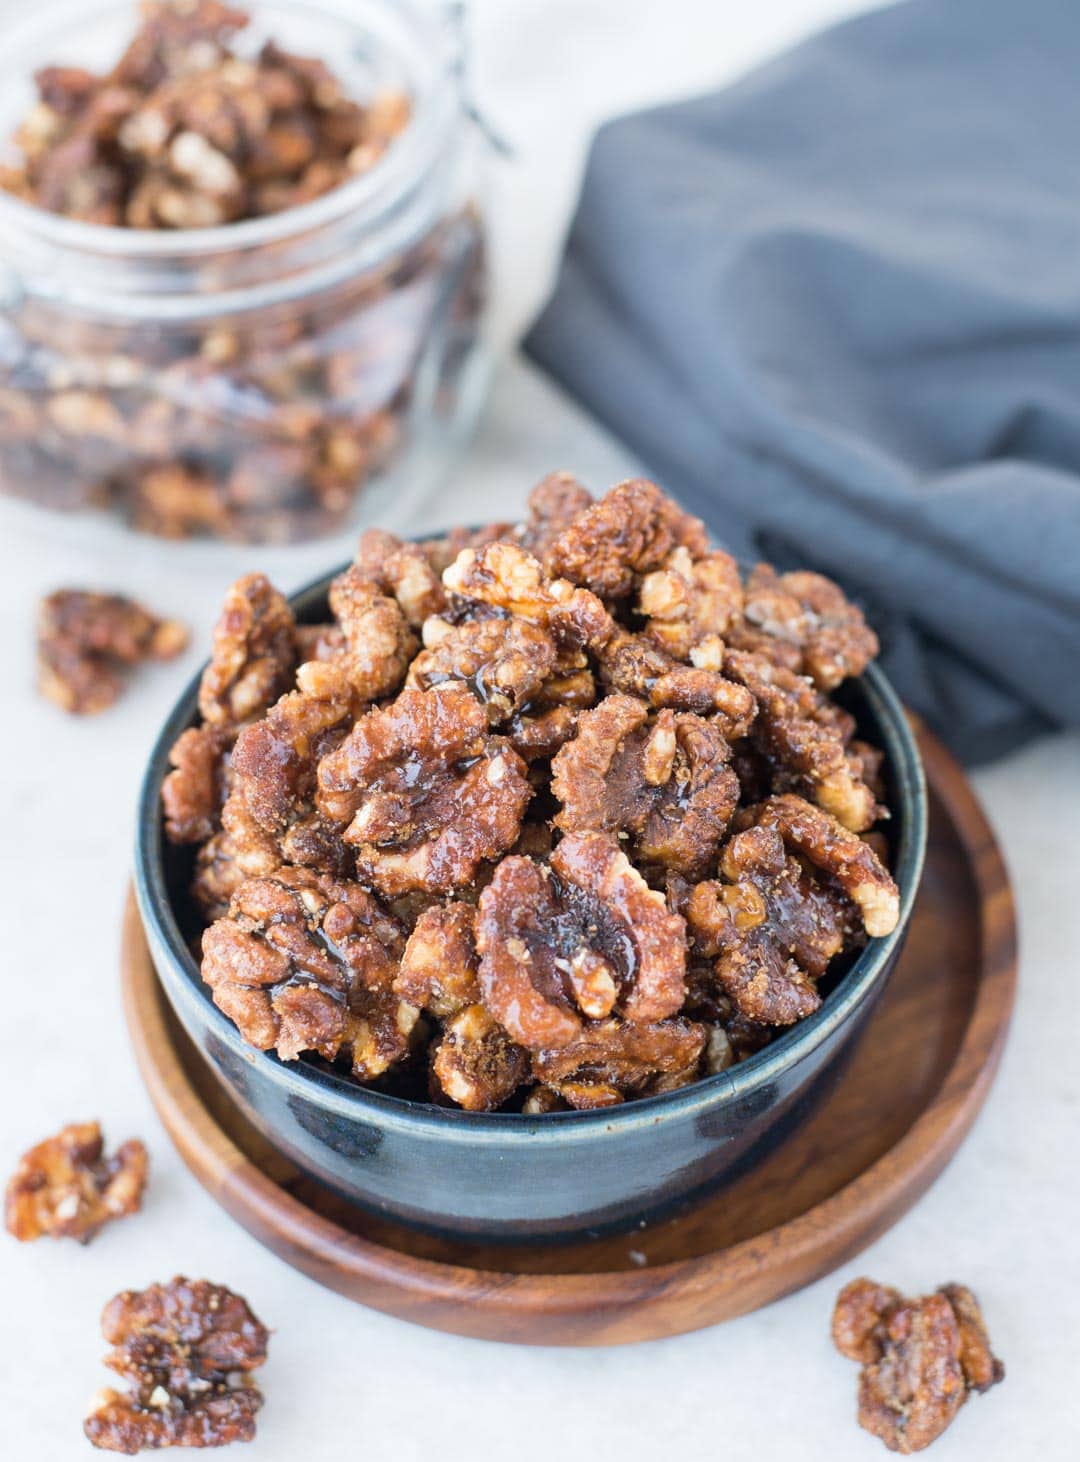 These Candied walnuts are roasted with honey and spices till crunchy, then tossed in brown sugar. Honey Spiced Candied Walnuts are addictive snacks, can be added to salads and perfect for gifting this holiday season.